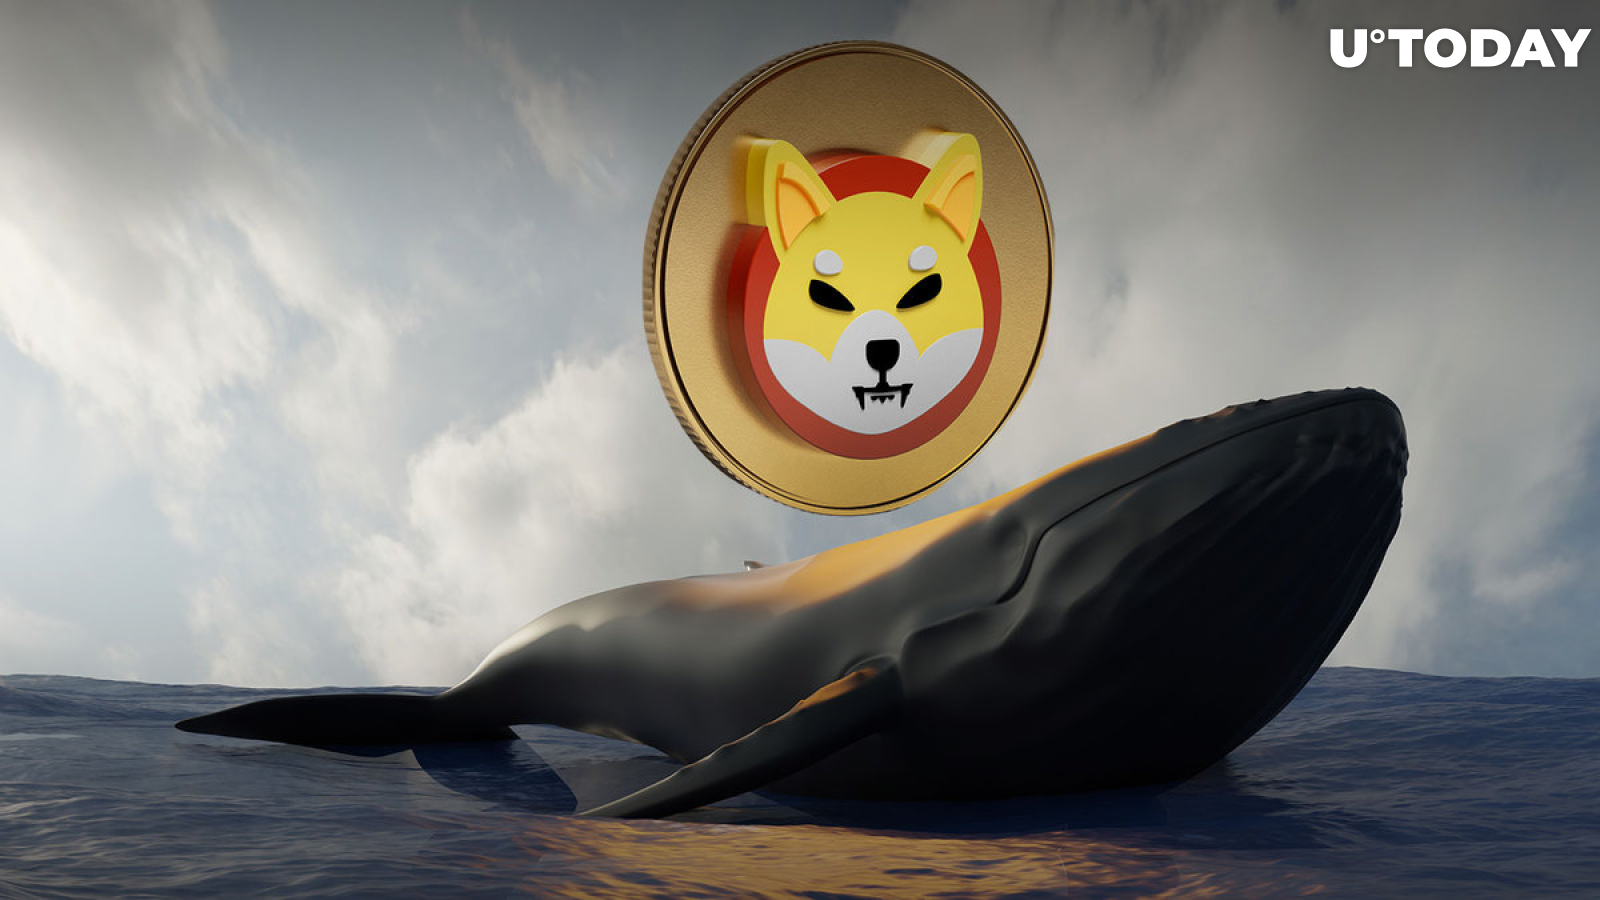 This Whale Dumps 623 Billion SHIB in Past 20 Days, But He Bought 2x More